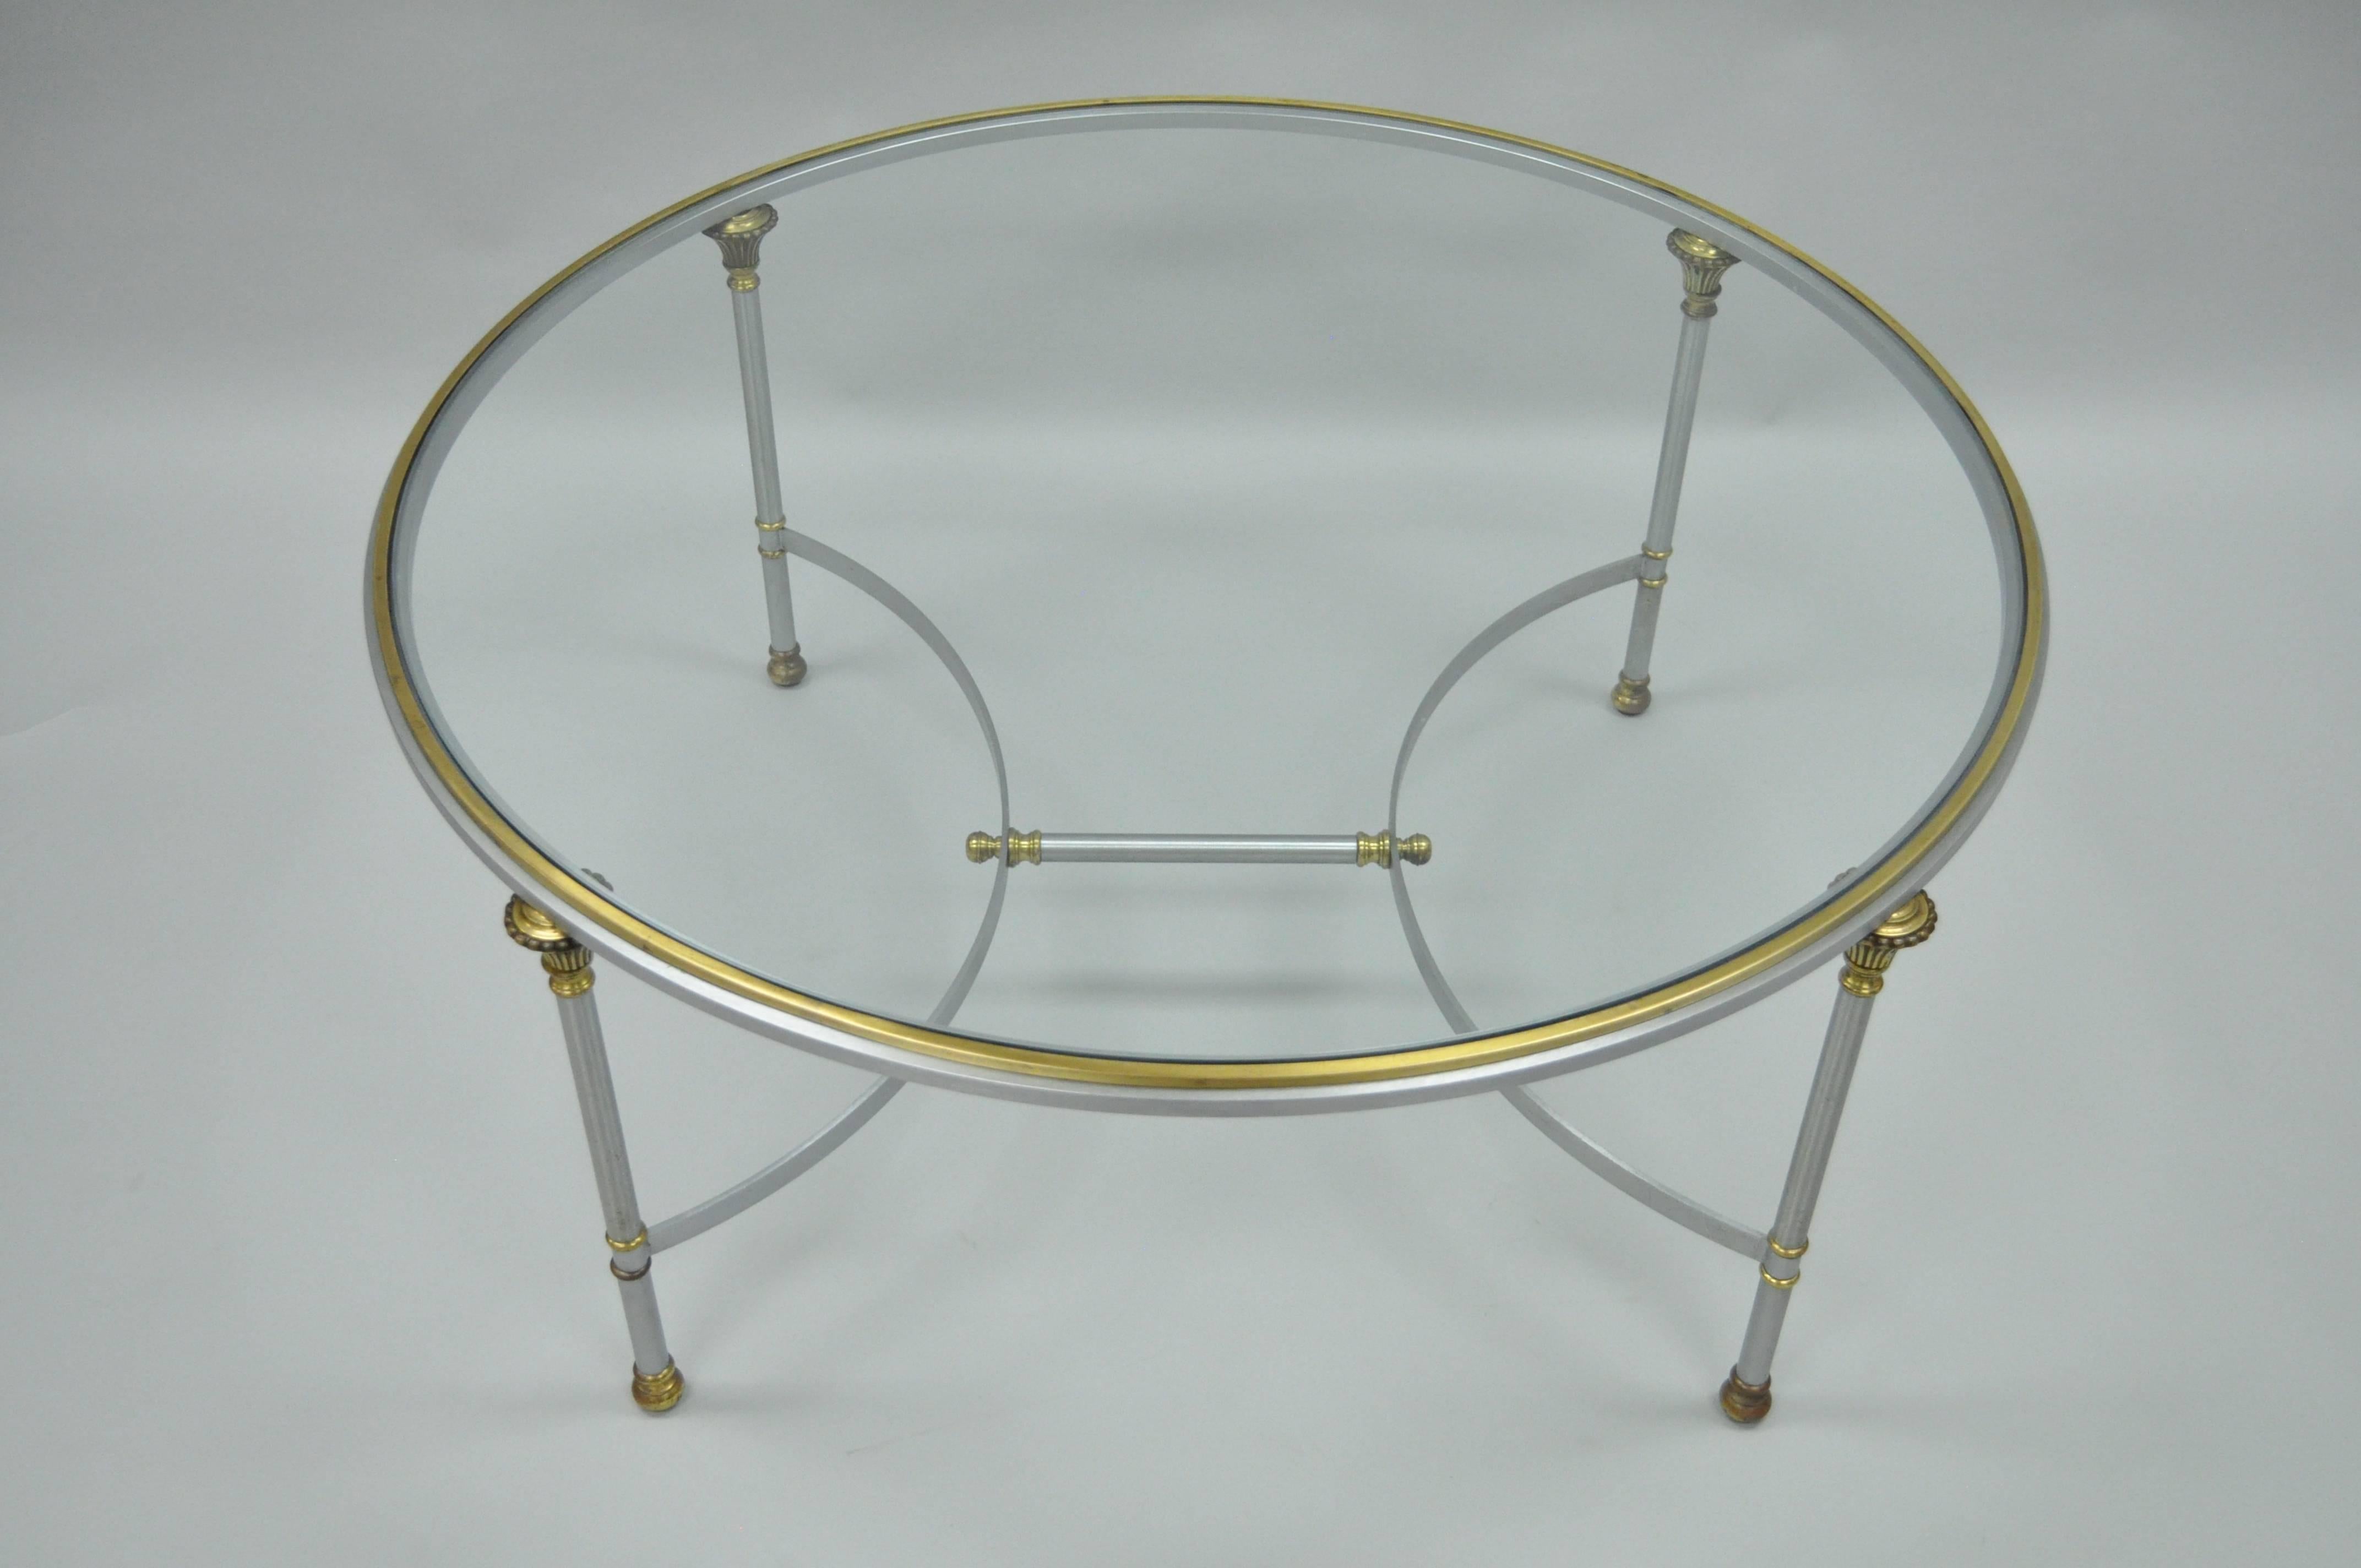 Italian Steel & Brass Round Directoire Neoclassical Coffee Table after Jansen In Good Condition For Sale In Philadelphia, PA